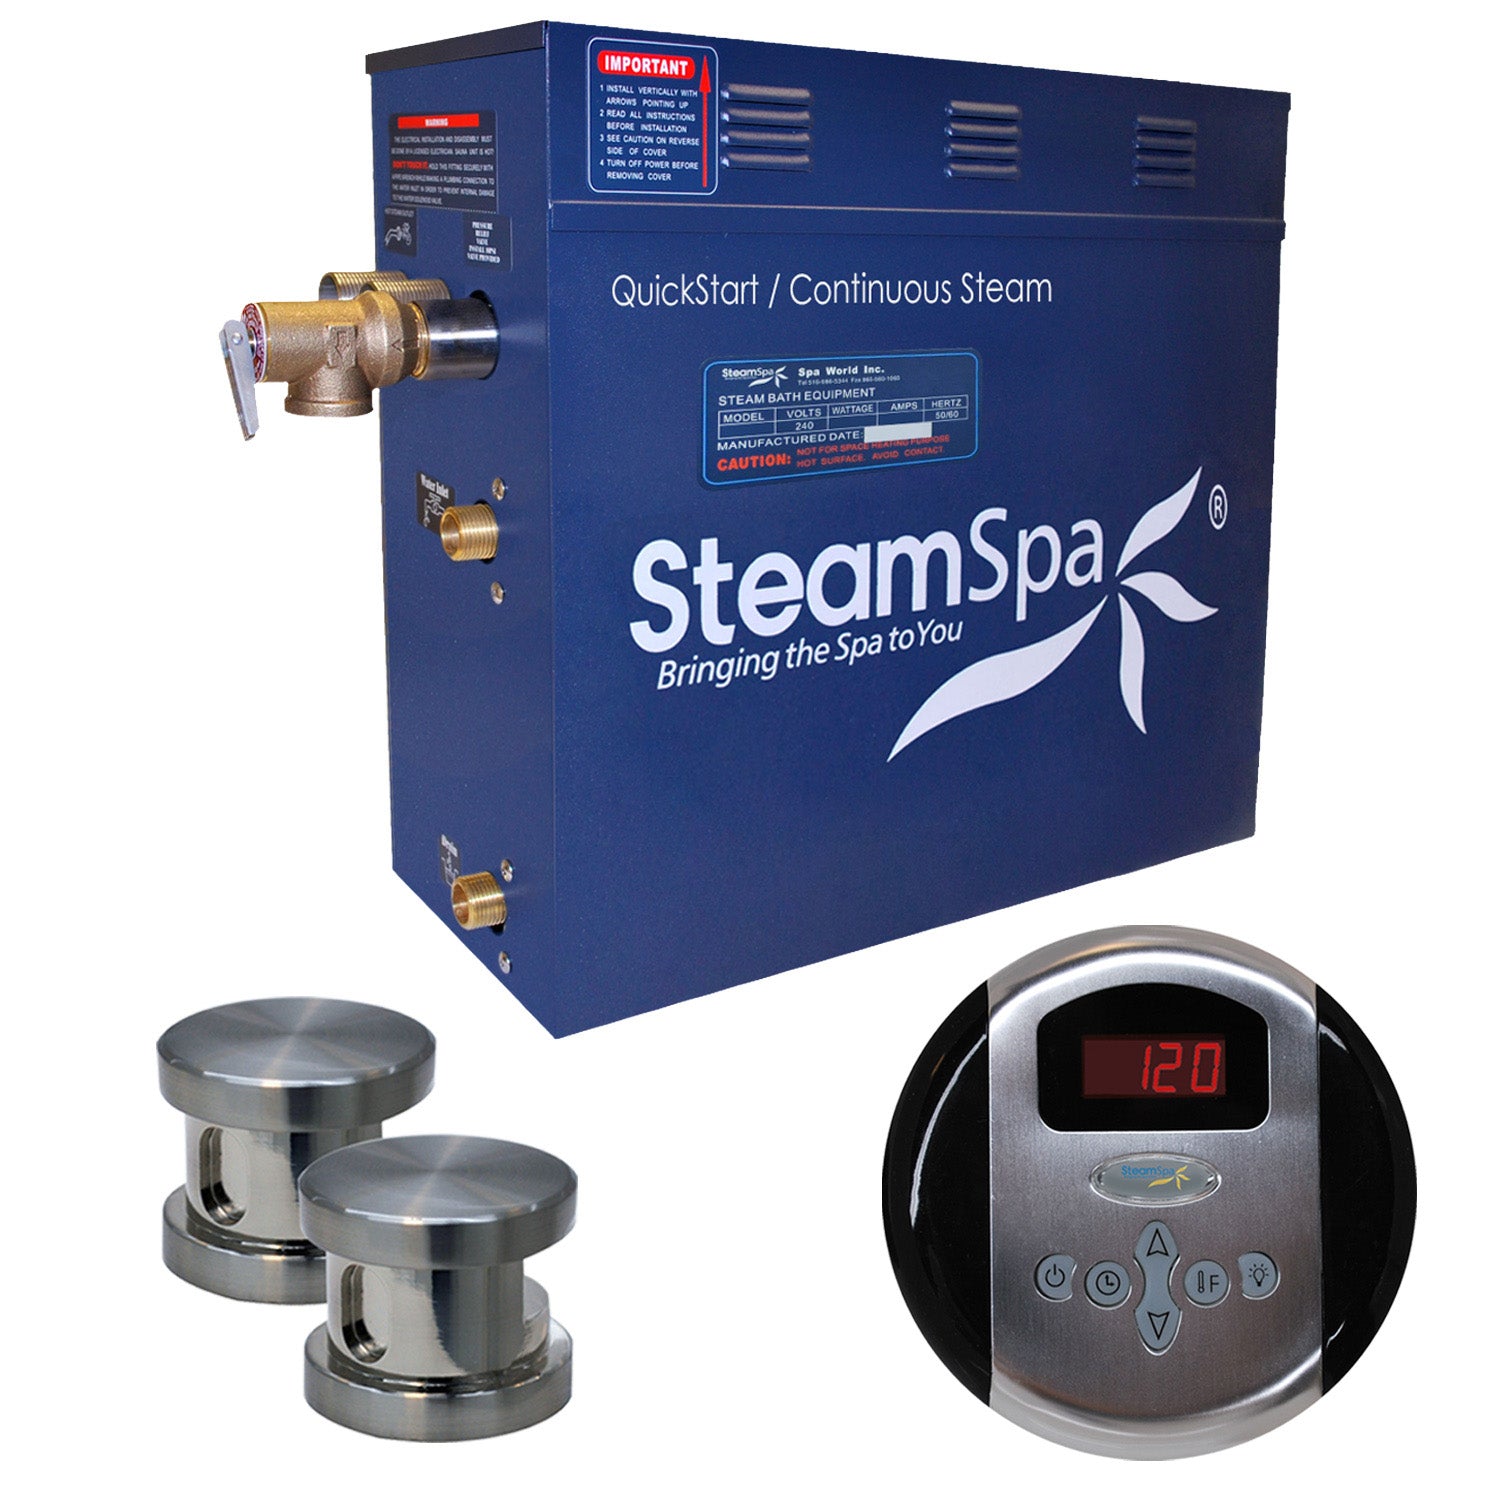 SteamSpa Oasis 6 KW QuickStart Acu-Steam Bath Generator Package OA600 - 16 in. L x 6.5 in. W x 14.5 in. H - Stainless Steel - Brushed Nickel - Includes a 6kW QuickStart Acu-Steam Bath Generator, Control Panel, Steam head, Pressure Relief Valve - Vital Hydrotherapy